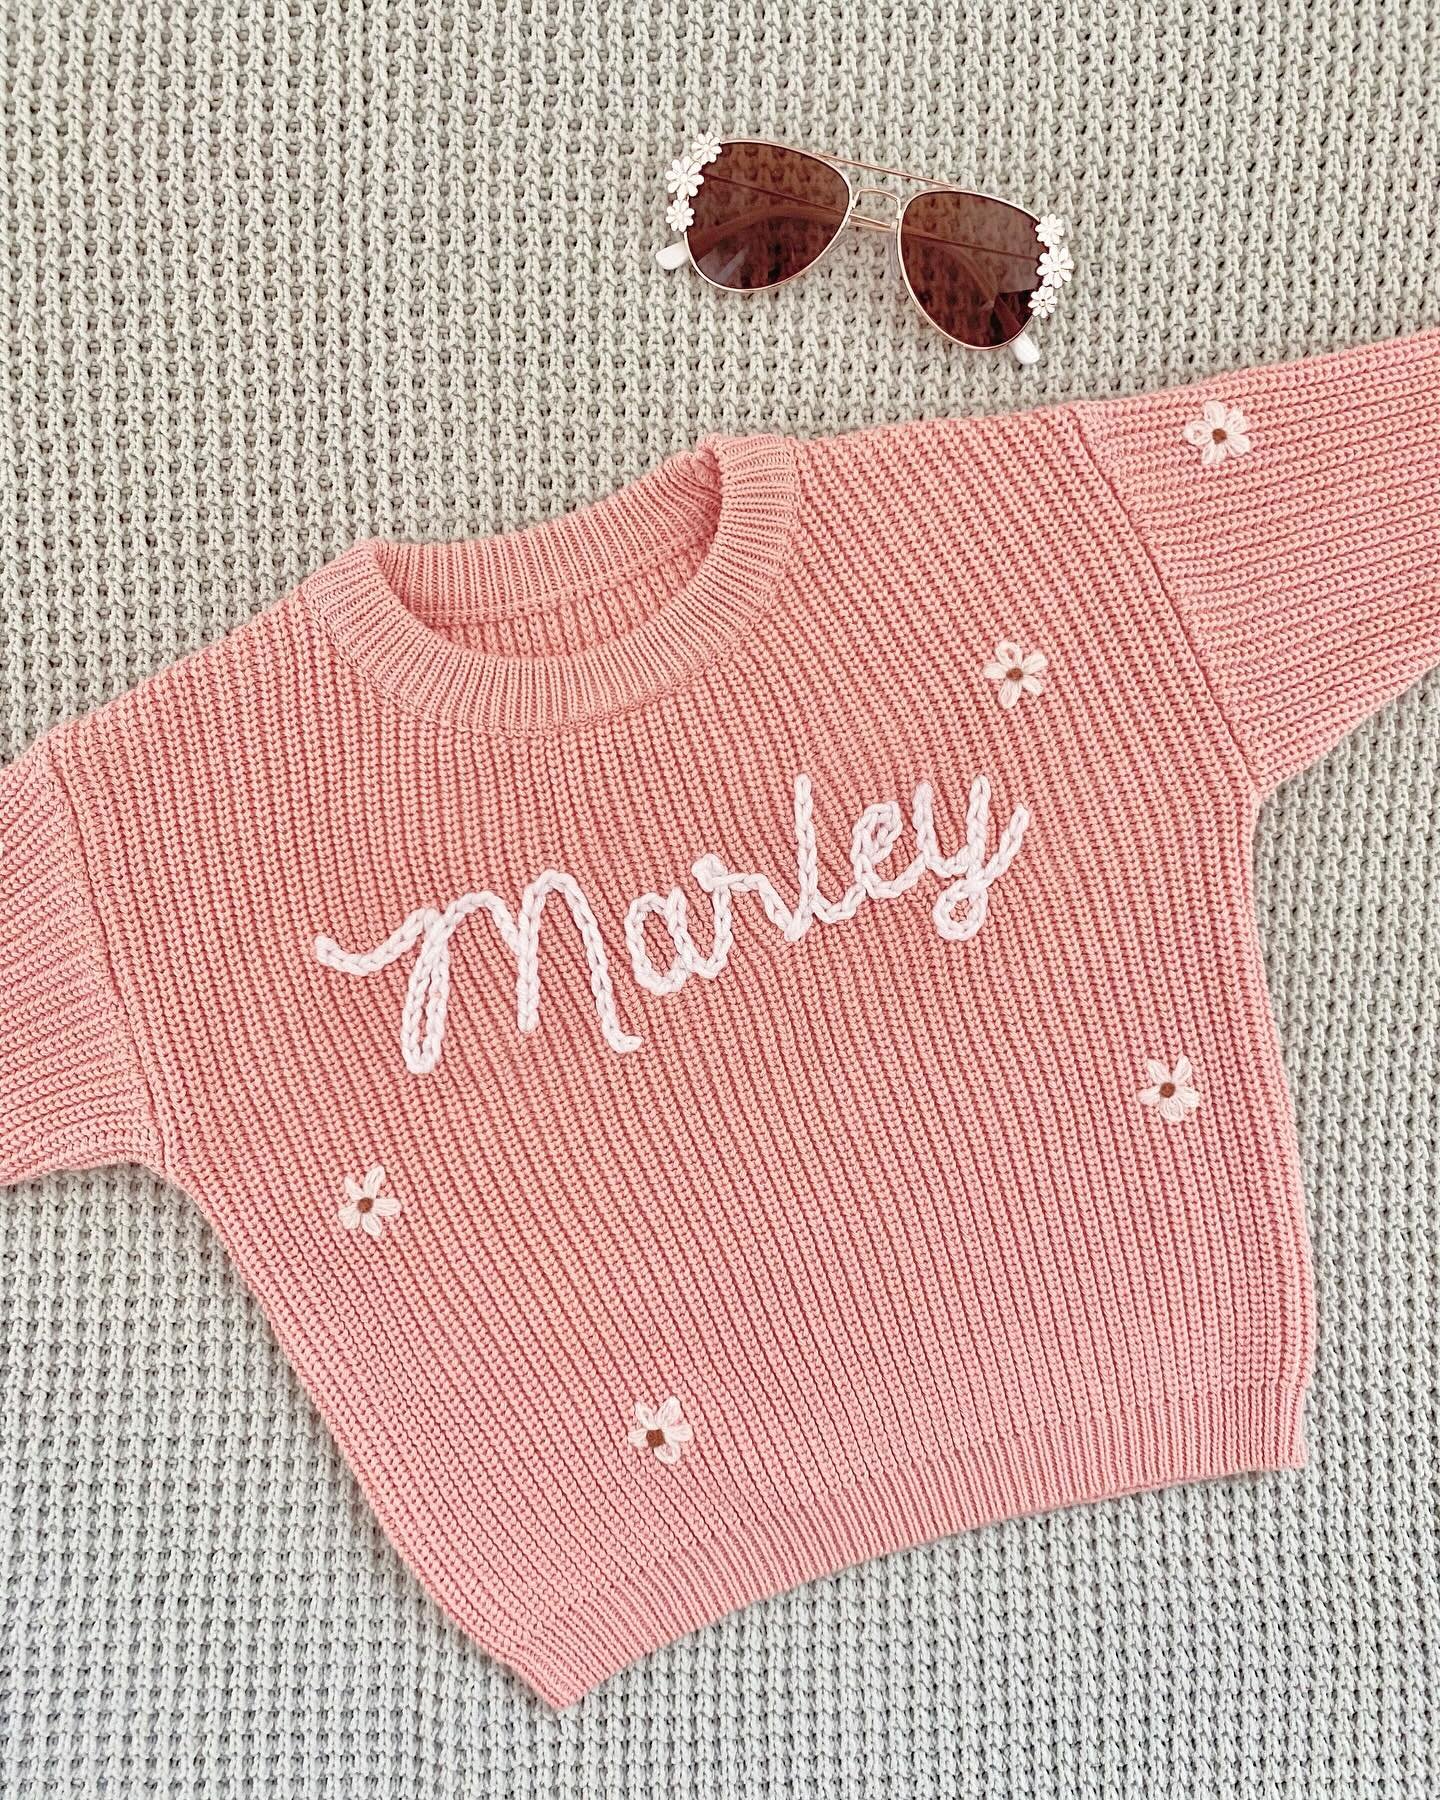 Daisies are having a real moment and we&rsquo;re here for it 🌸🌼

Happy 1st Birthday Marley! 🥳💕